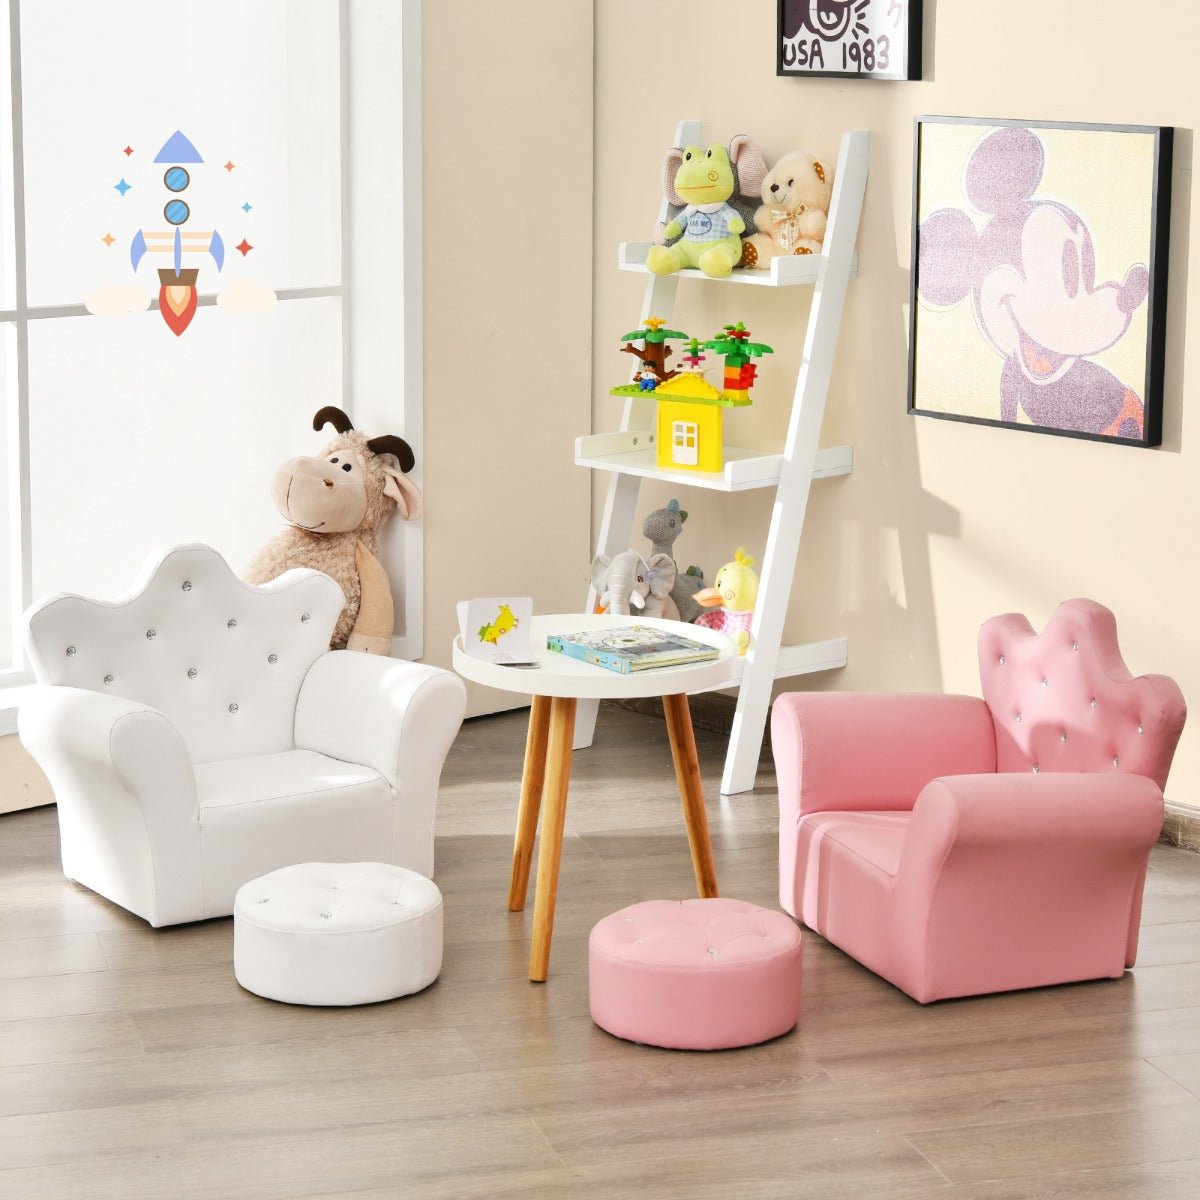 Royal Crown Kids Sofa with Ottoman: Comfort Fit for Toddlers' Palace